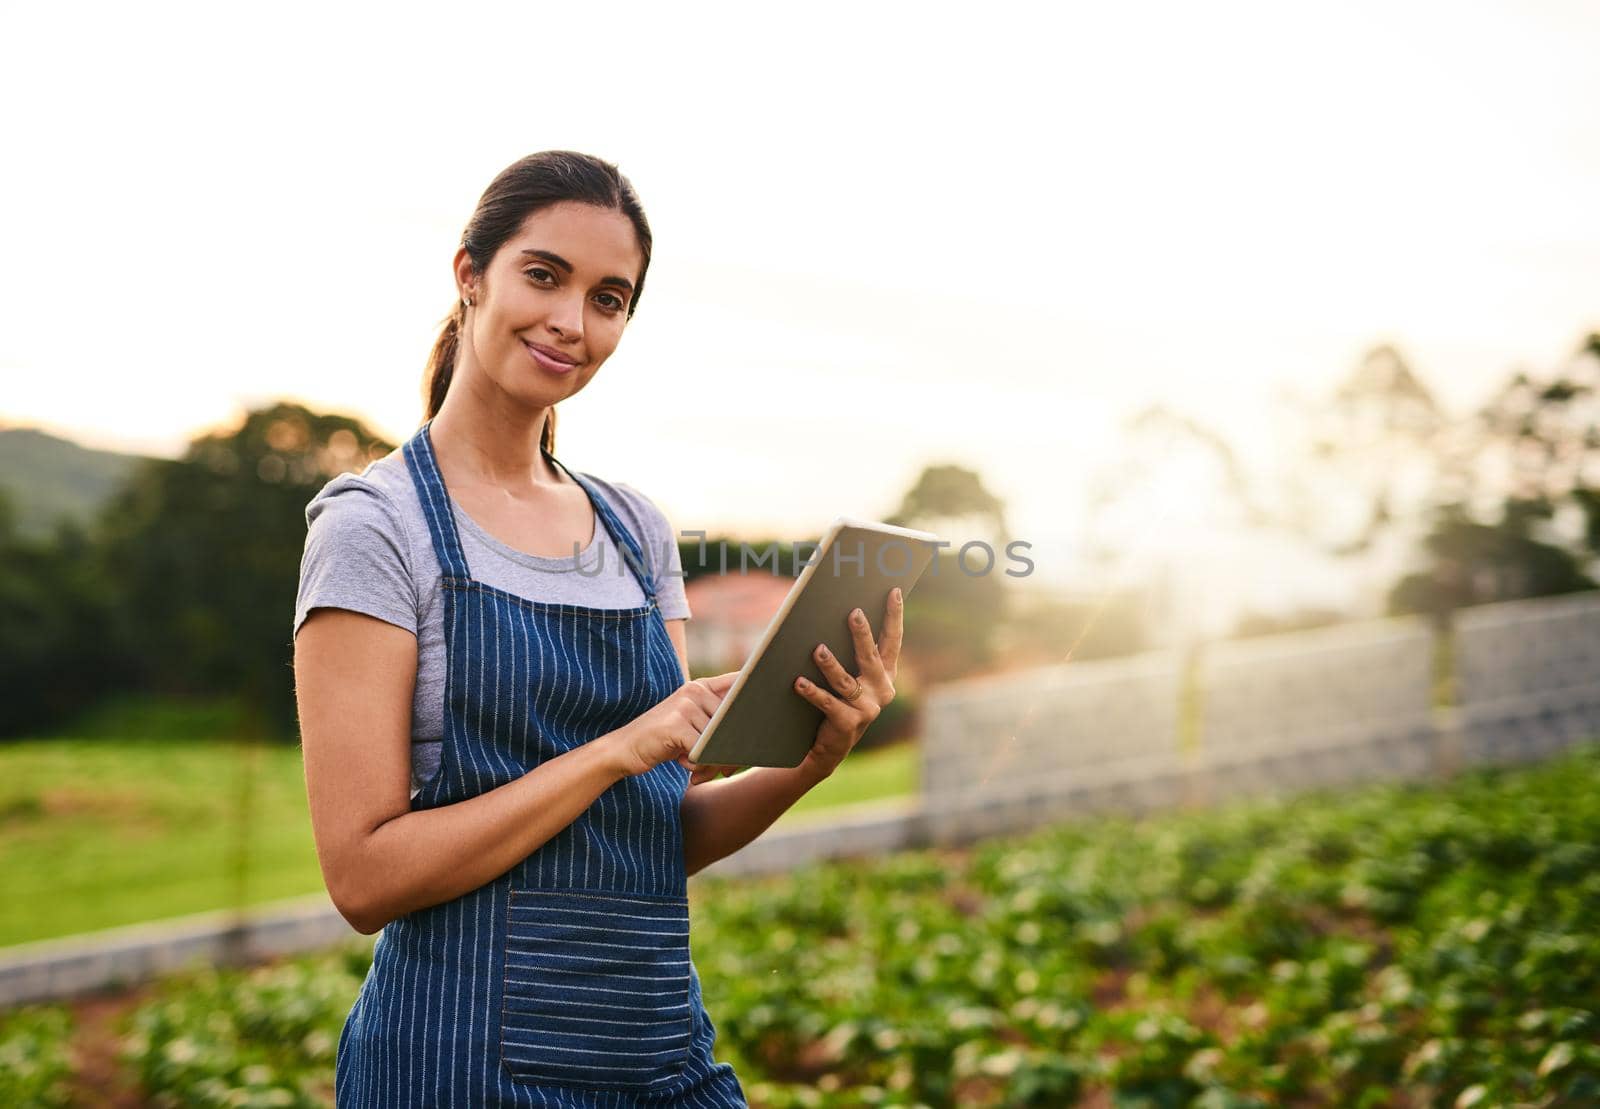 Portrait of an attractive young woman using a tablet while working on her farm.